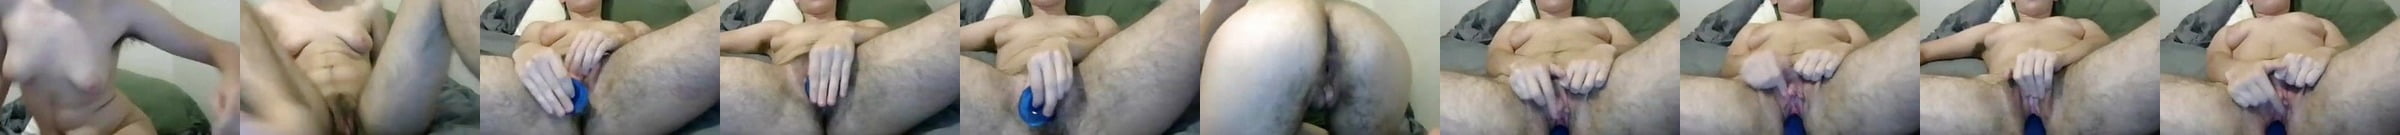 Very Hairy Pit Ass Legs Pussy Variety 22 Pics Xhamster 